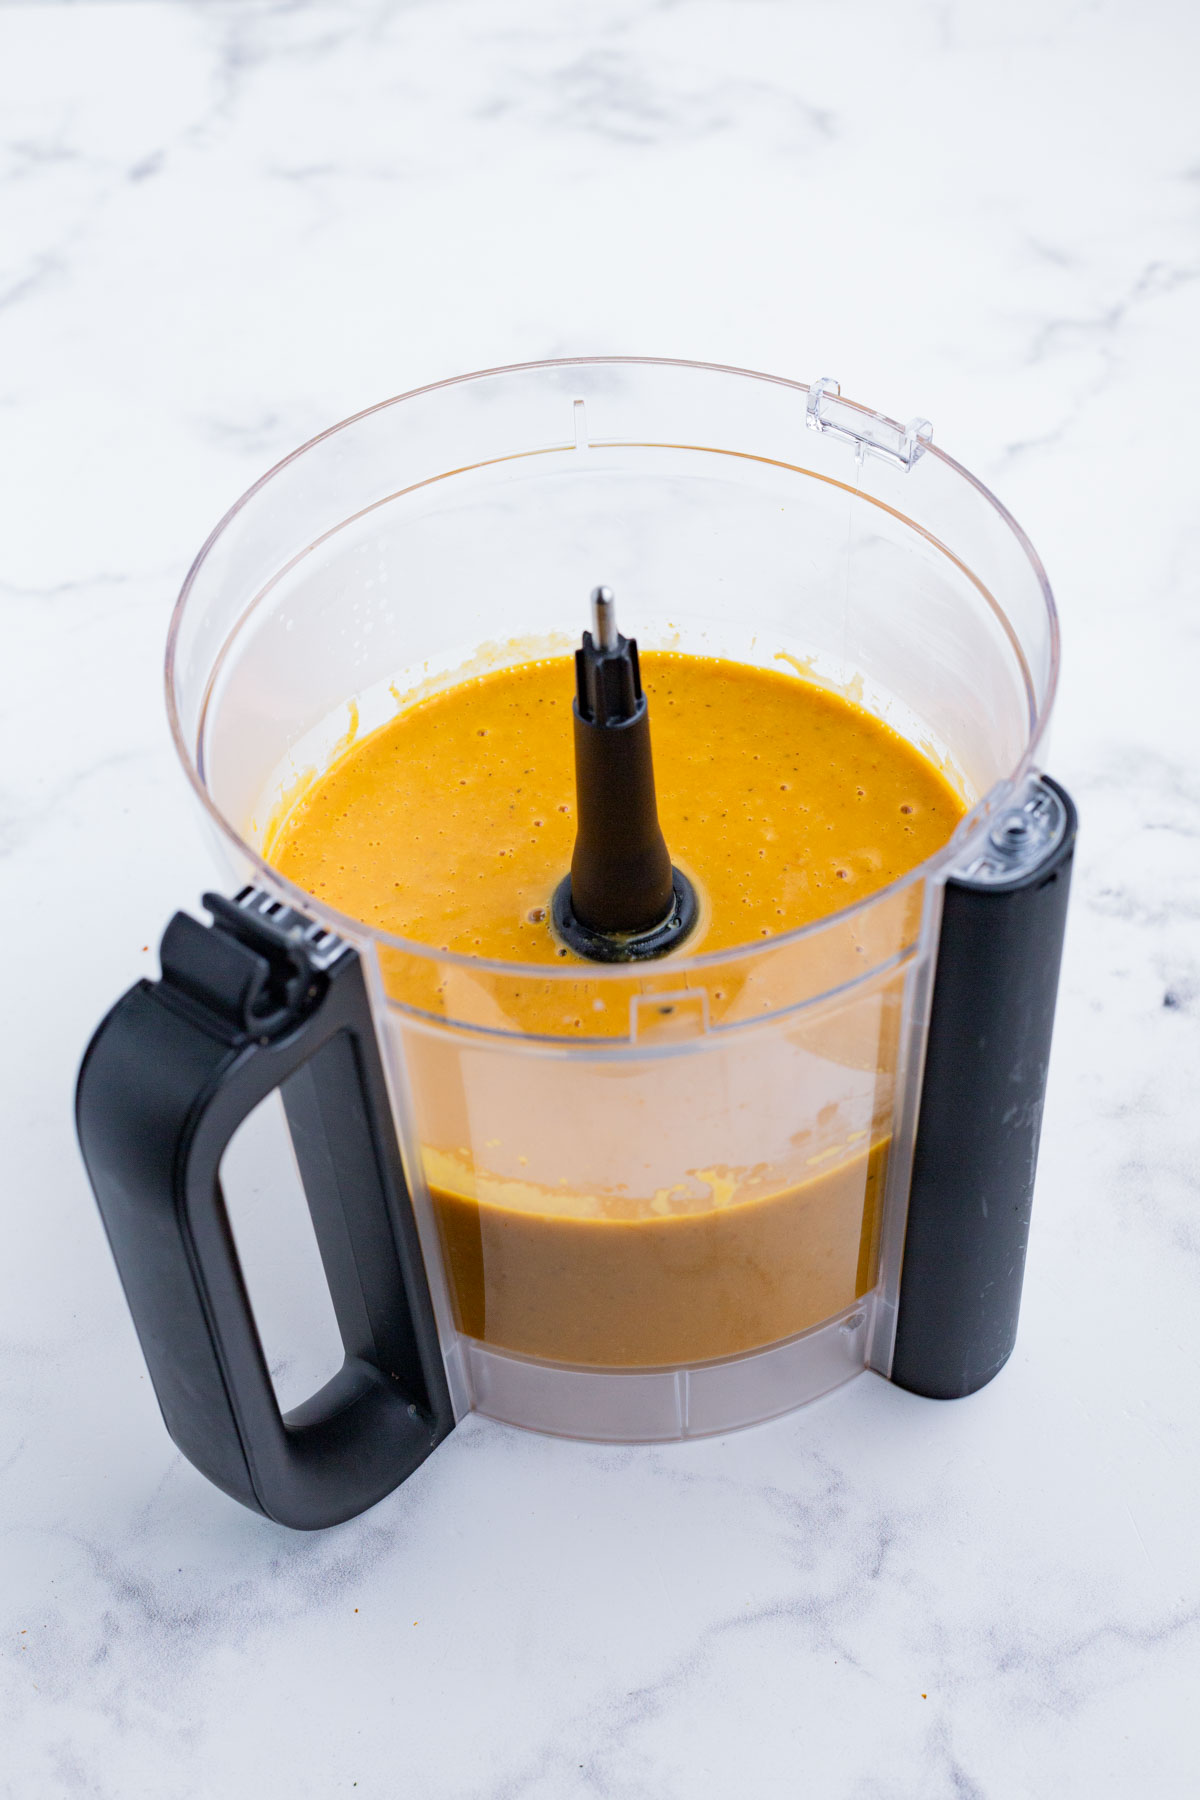 You can also use a blender to puree the ingredients.